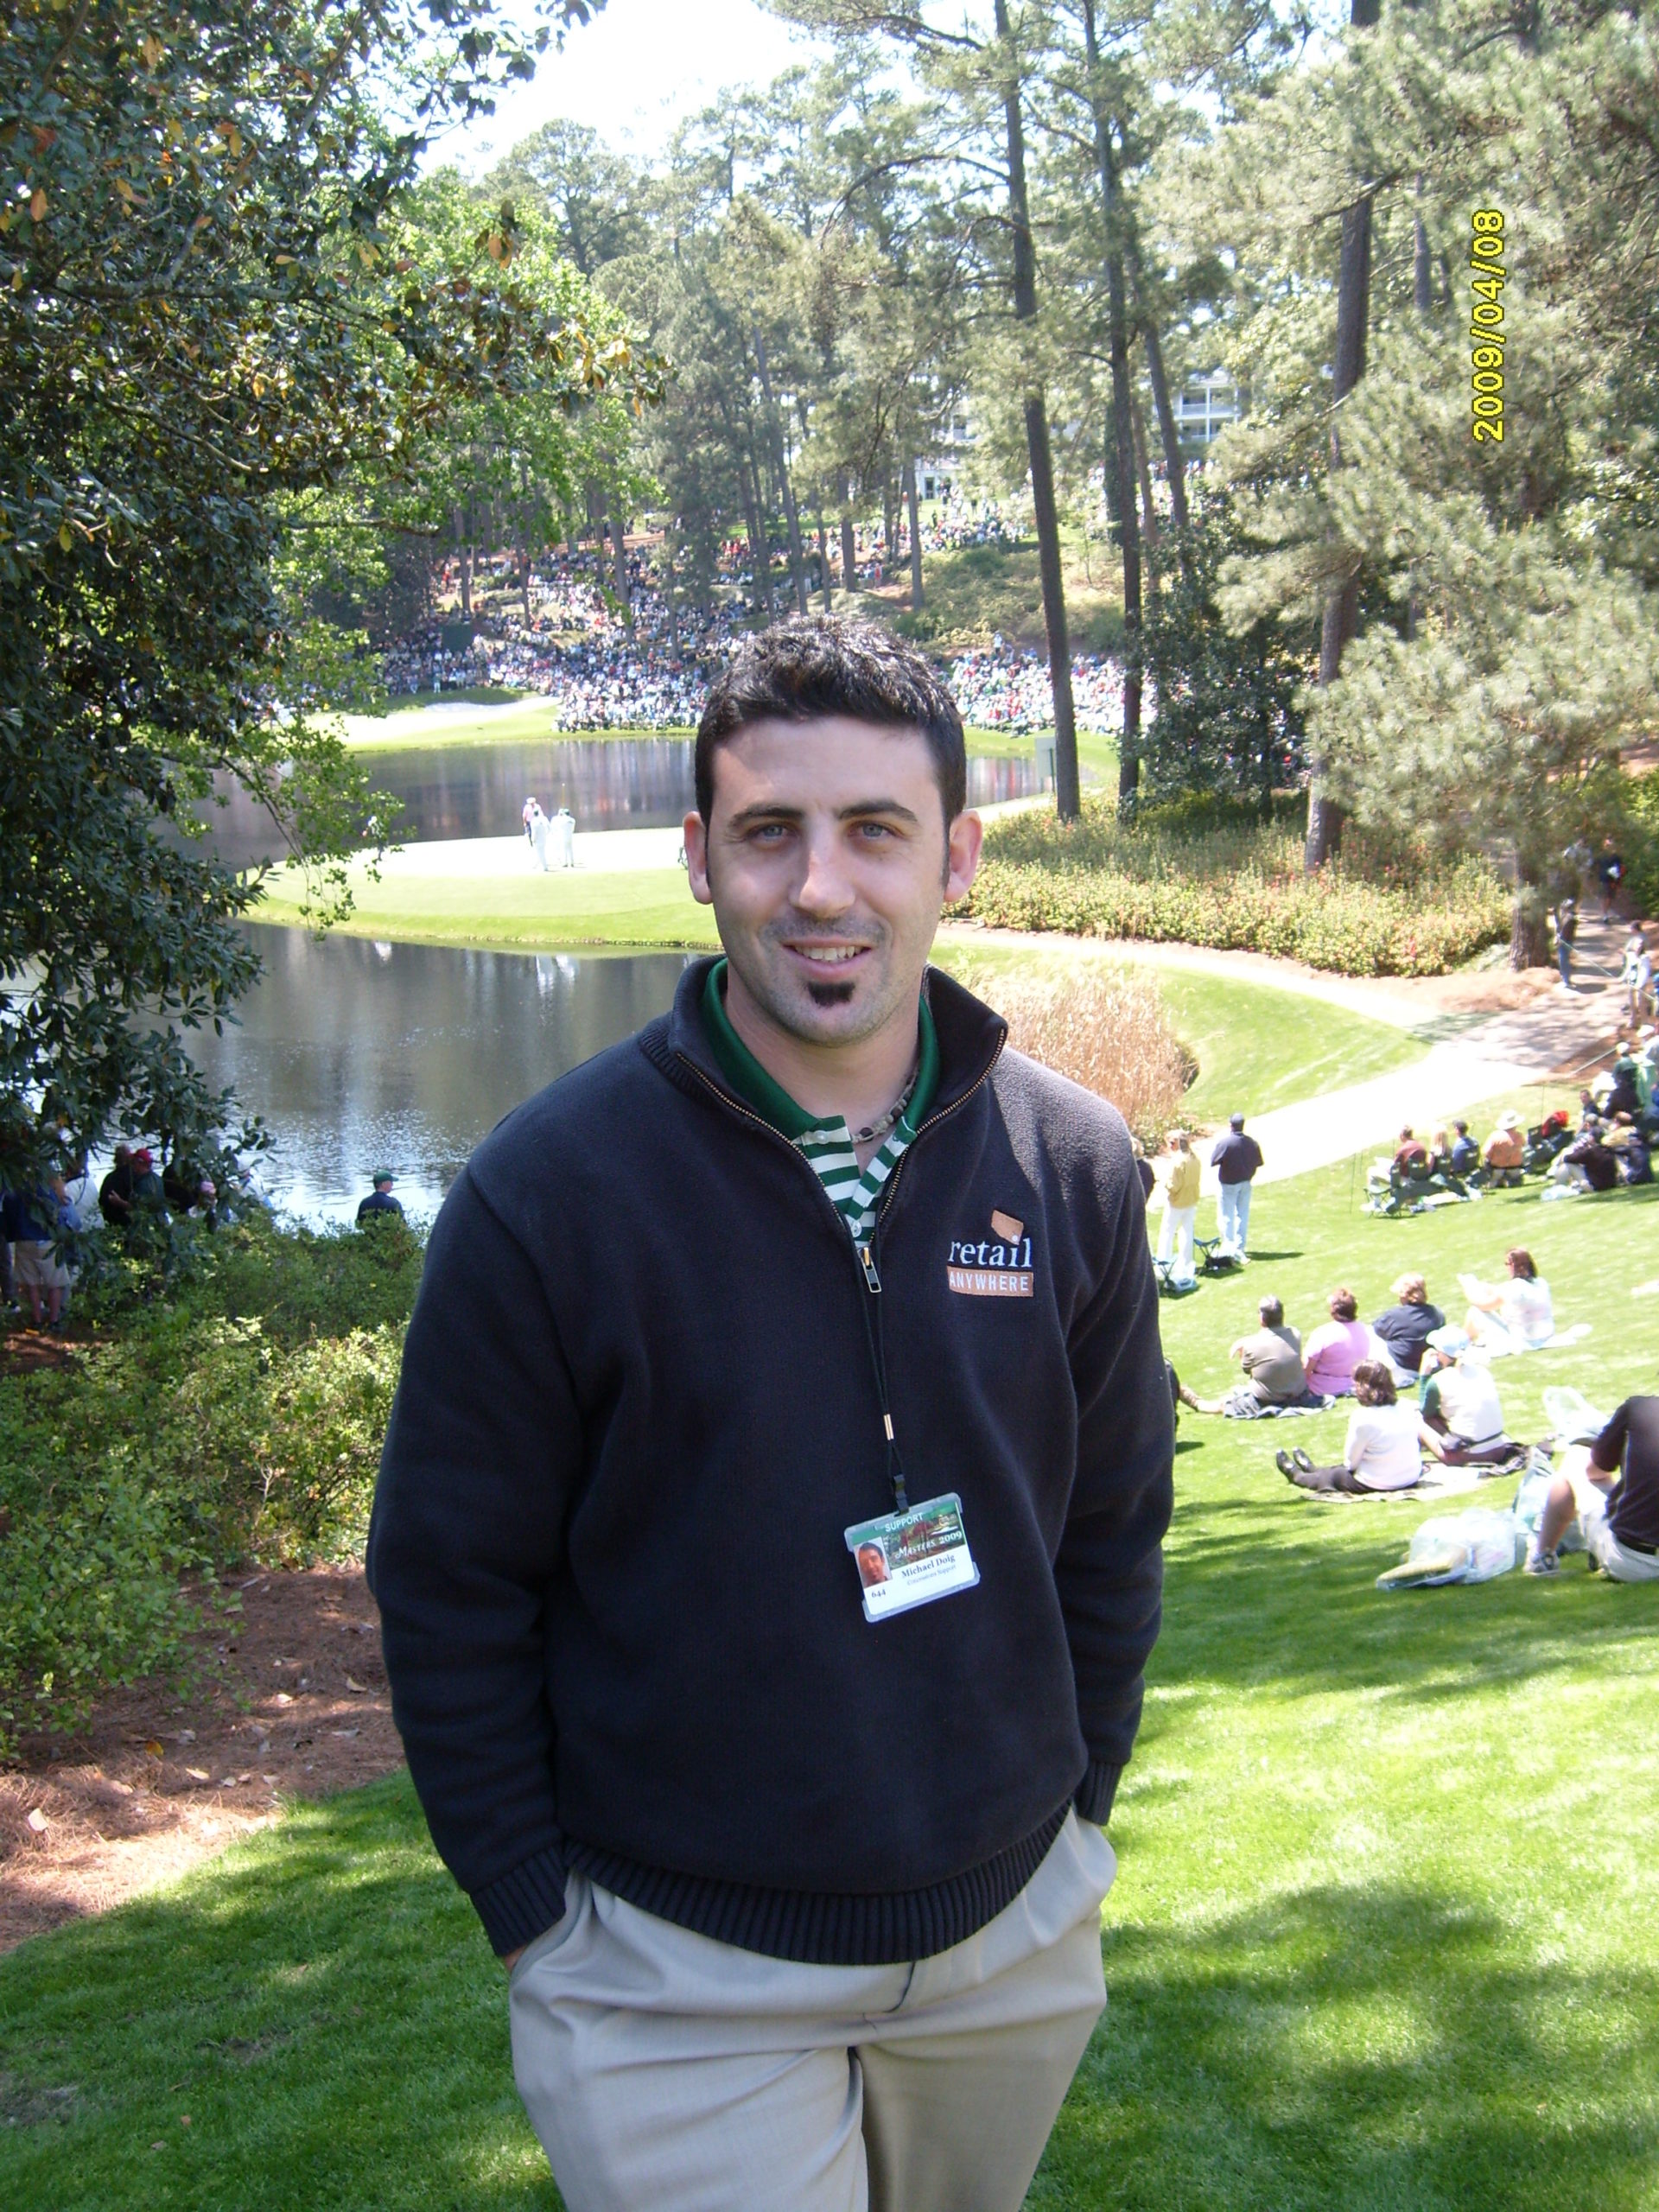 Michael Doig at the US Masters, 2009